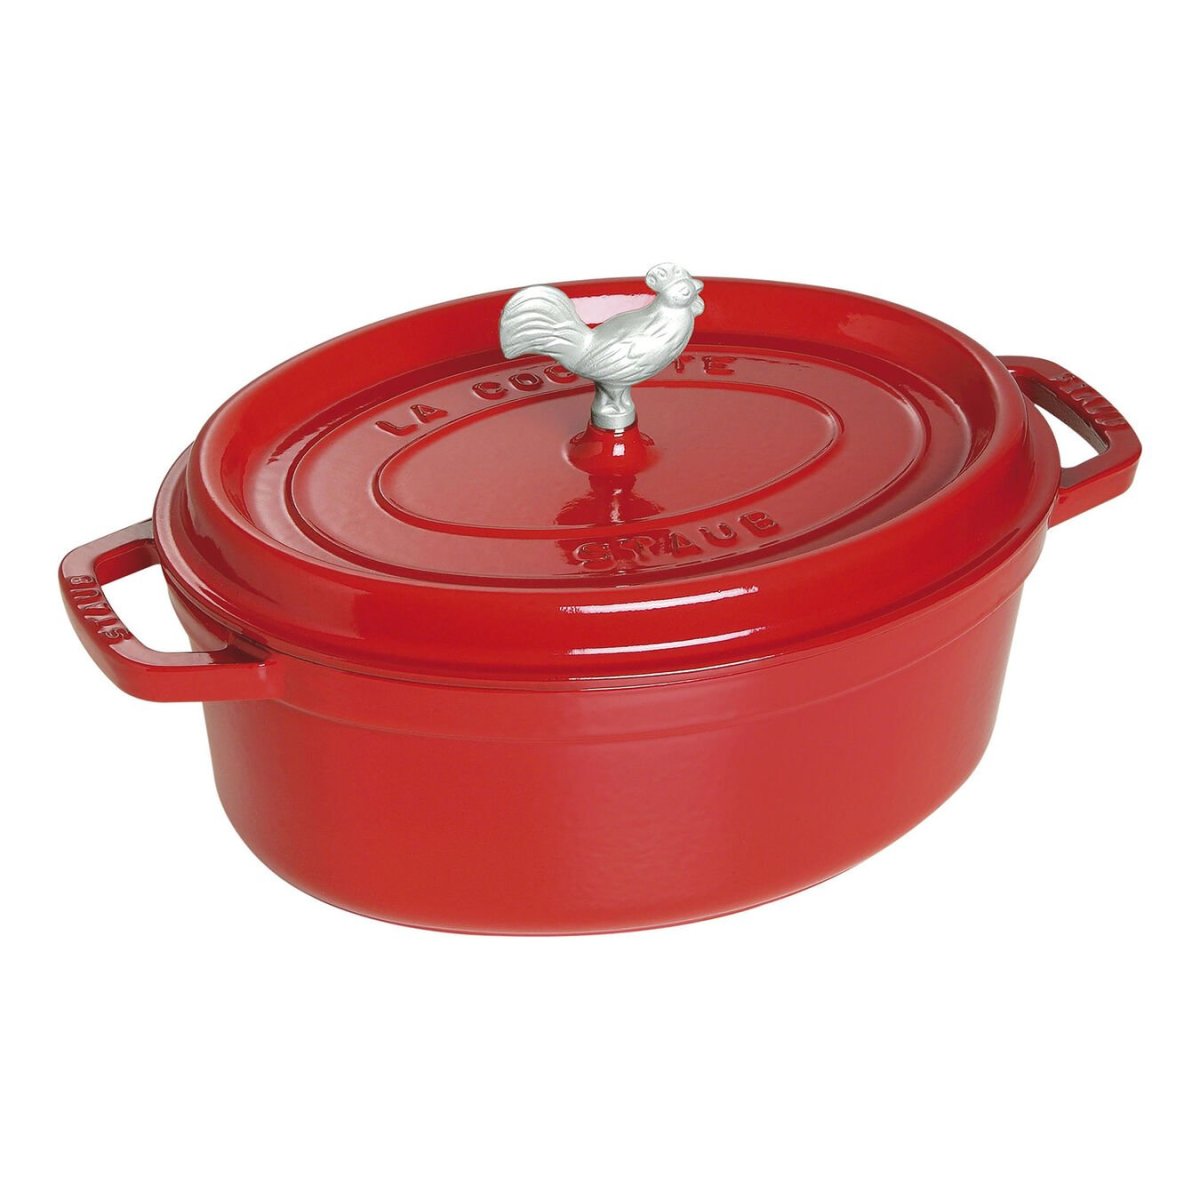 5.5. QT Oval Staub Cocotte in Cherry color with rooster lid.